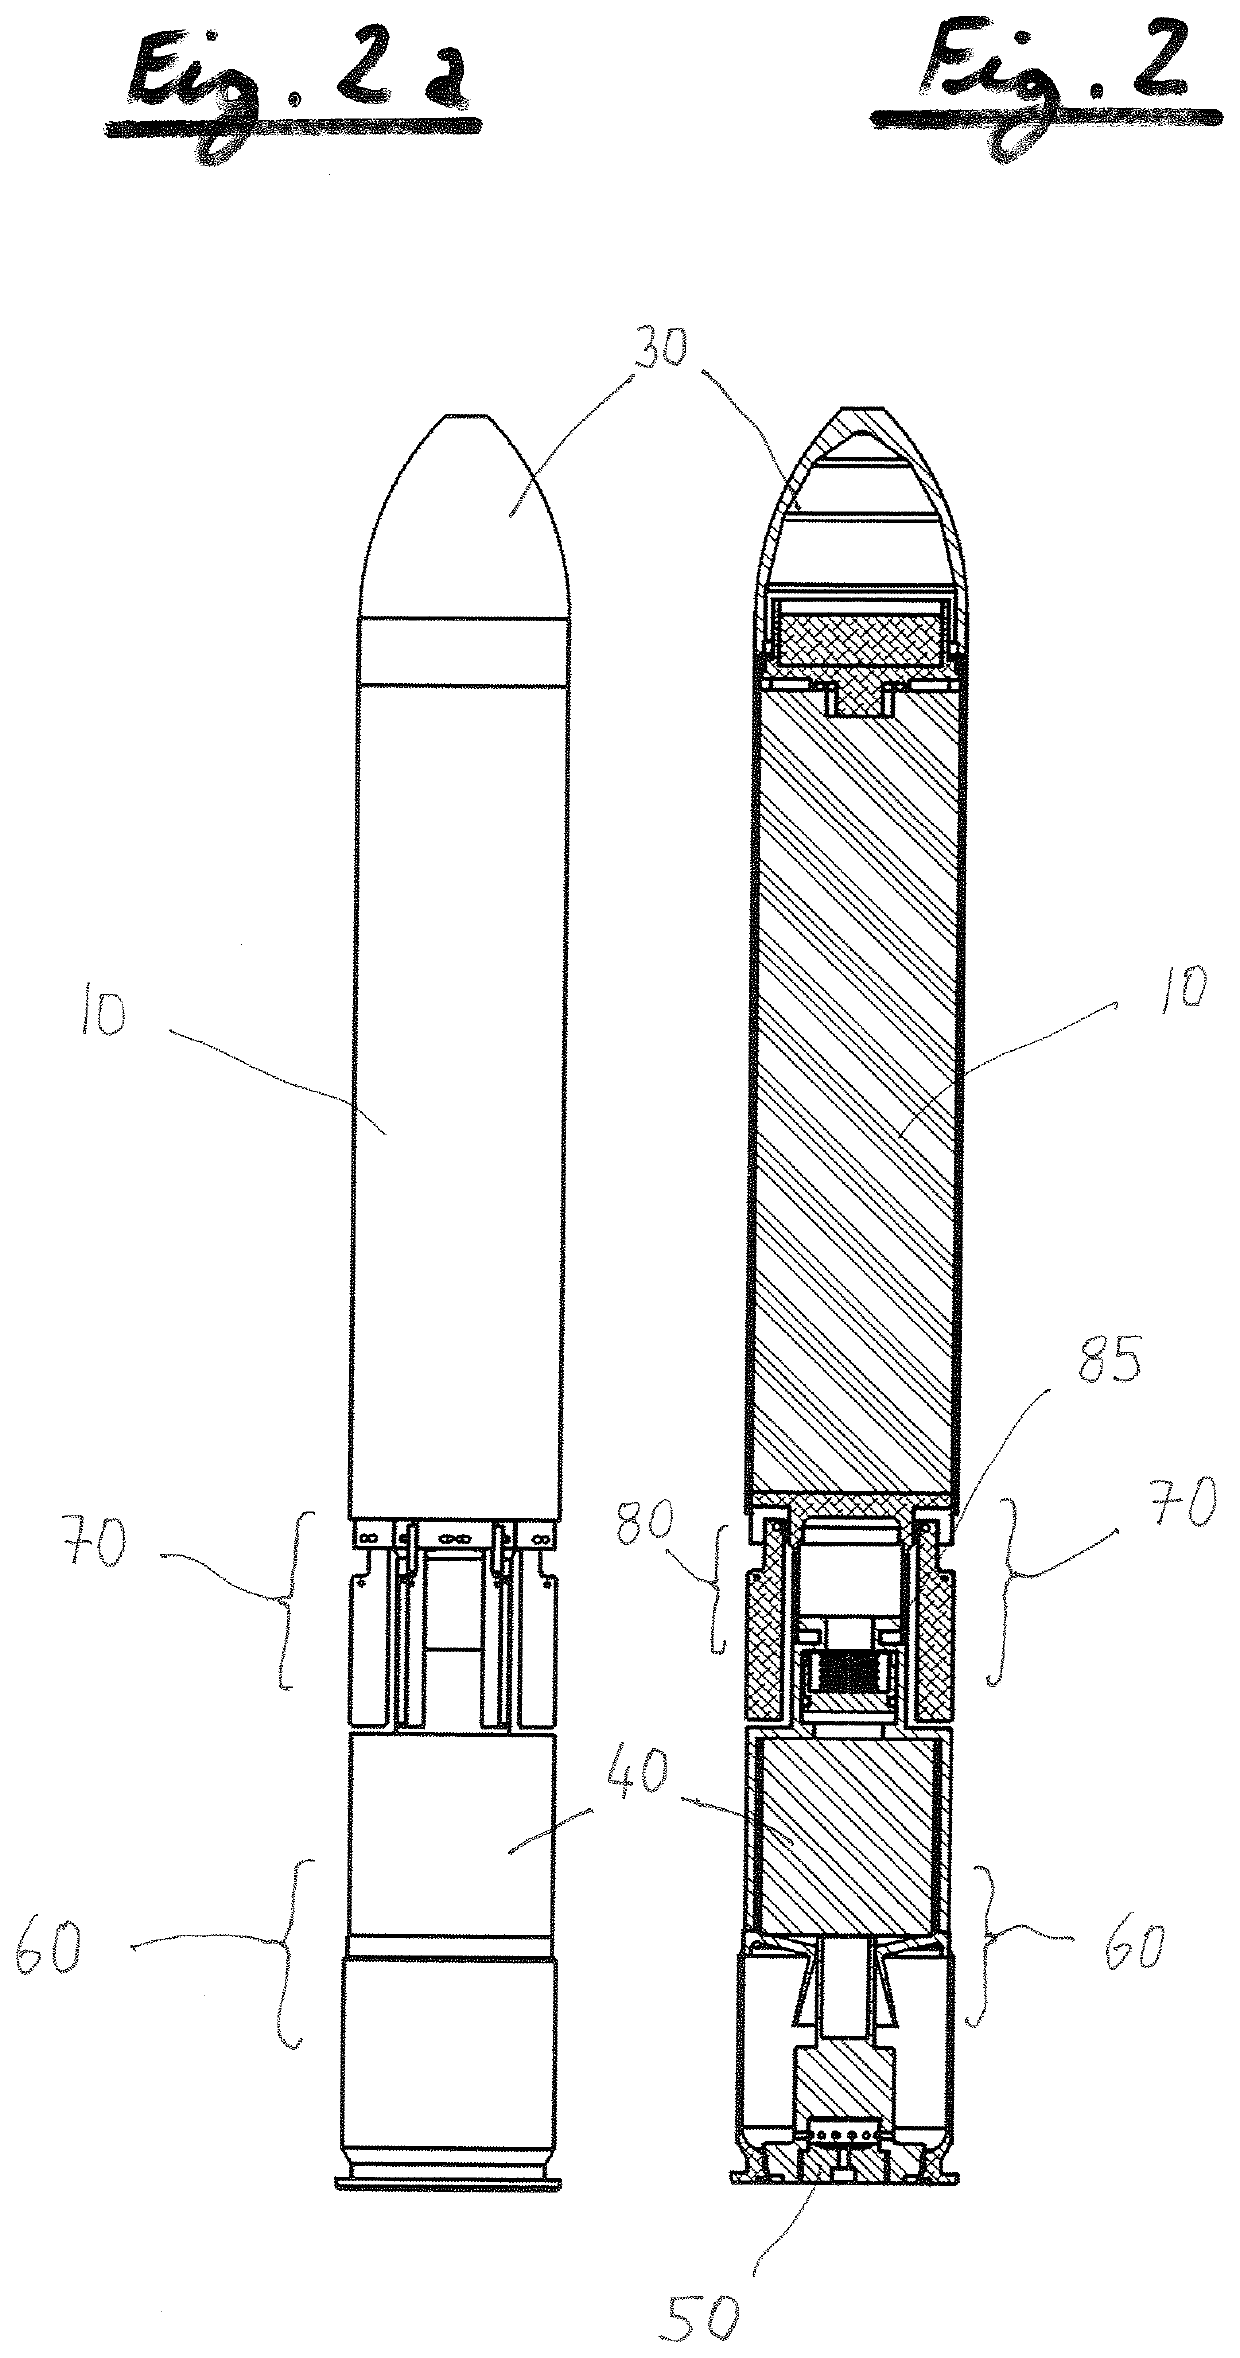 Rocket armament launchable from a tubular launcher with an outside launcher non-ignition securing and motor separation during flight